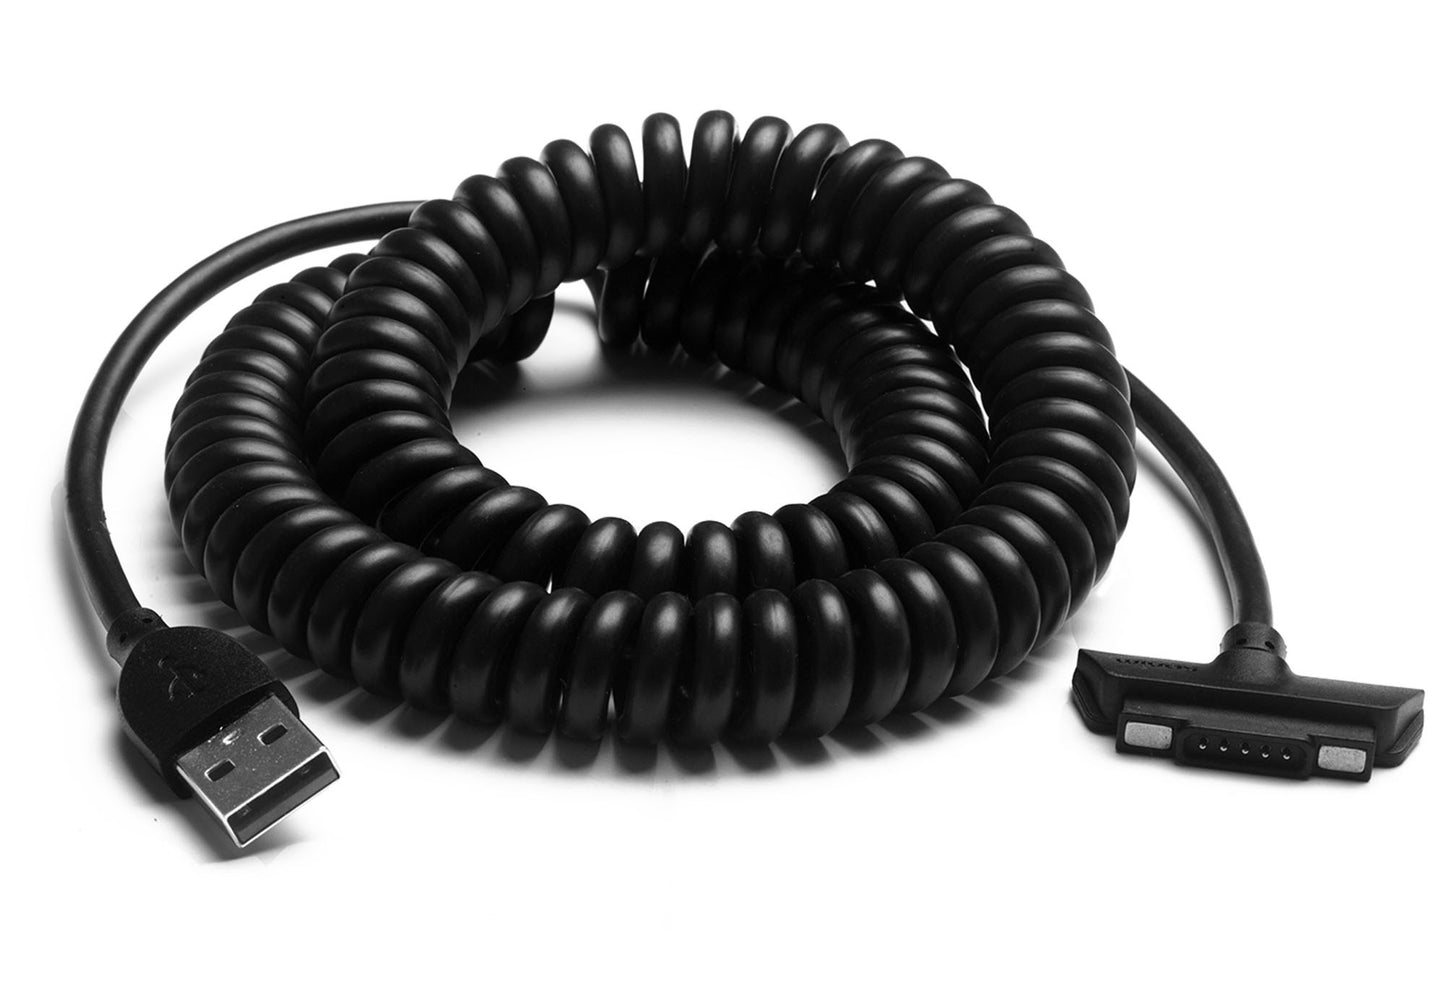 Magnetic USB to USB Coiled Data Cable for Sonim XP5, XP6, XP7 Handsets